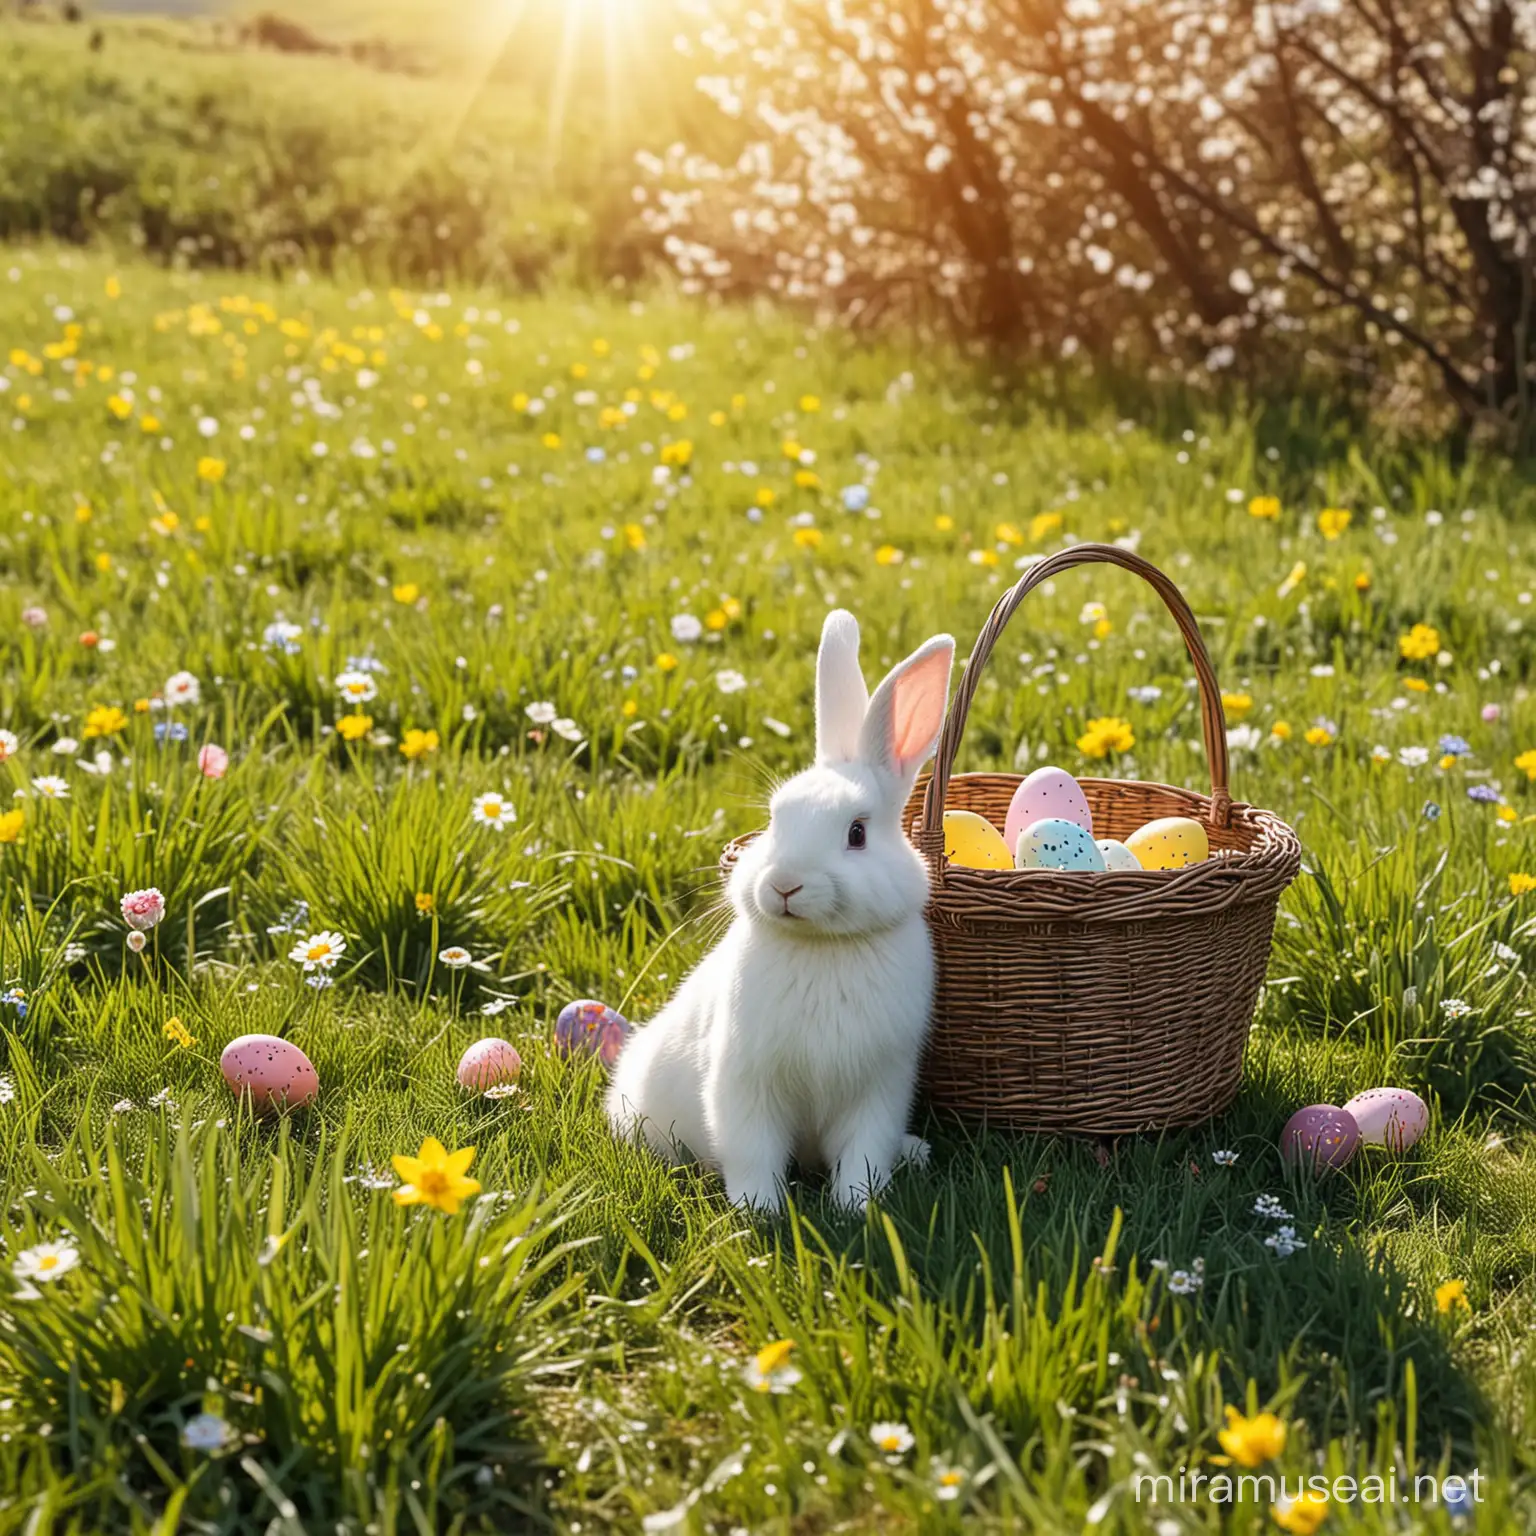 Easter Basket Amidst Lush Spring Meadow with Sunny Skies and Adorable Bunny